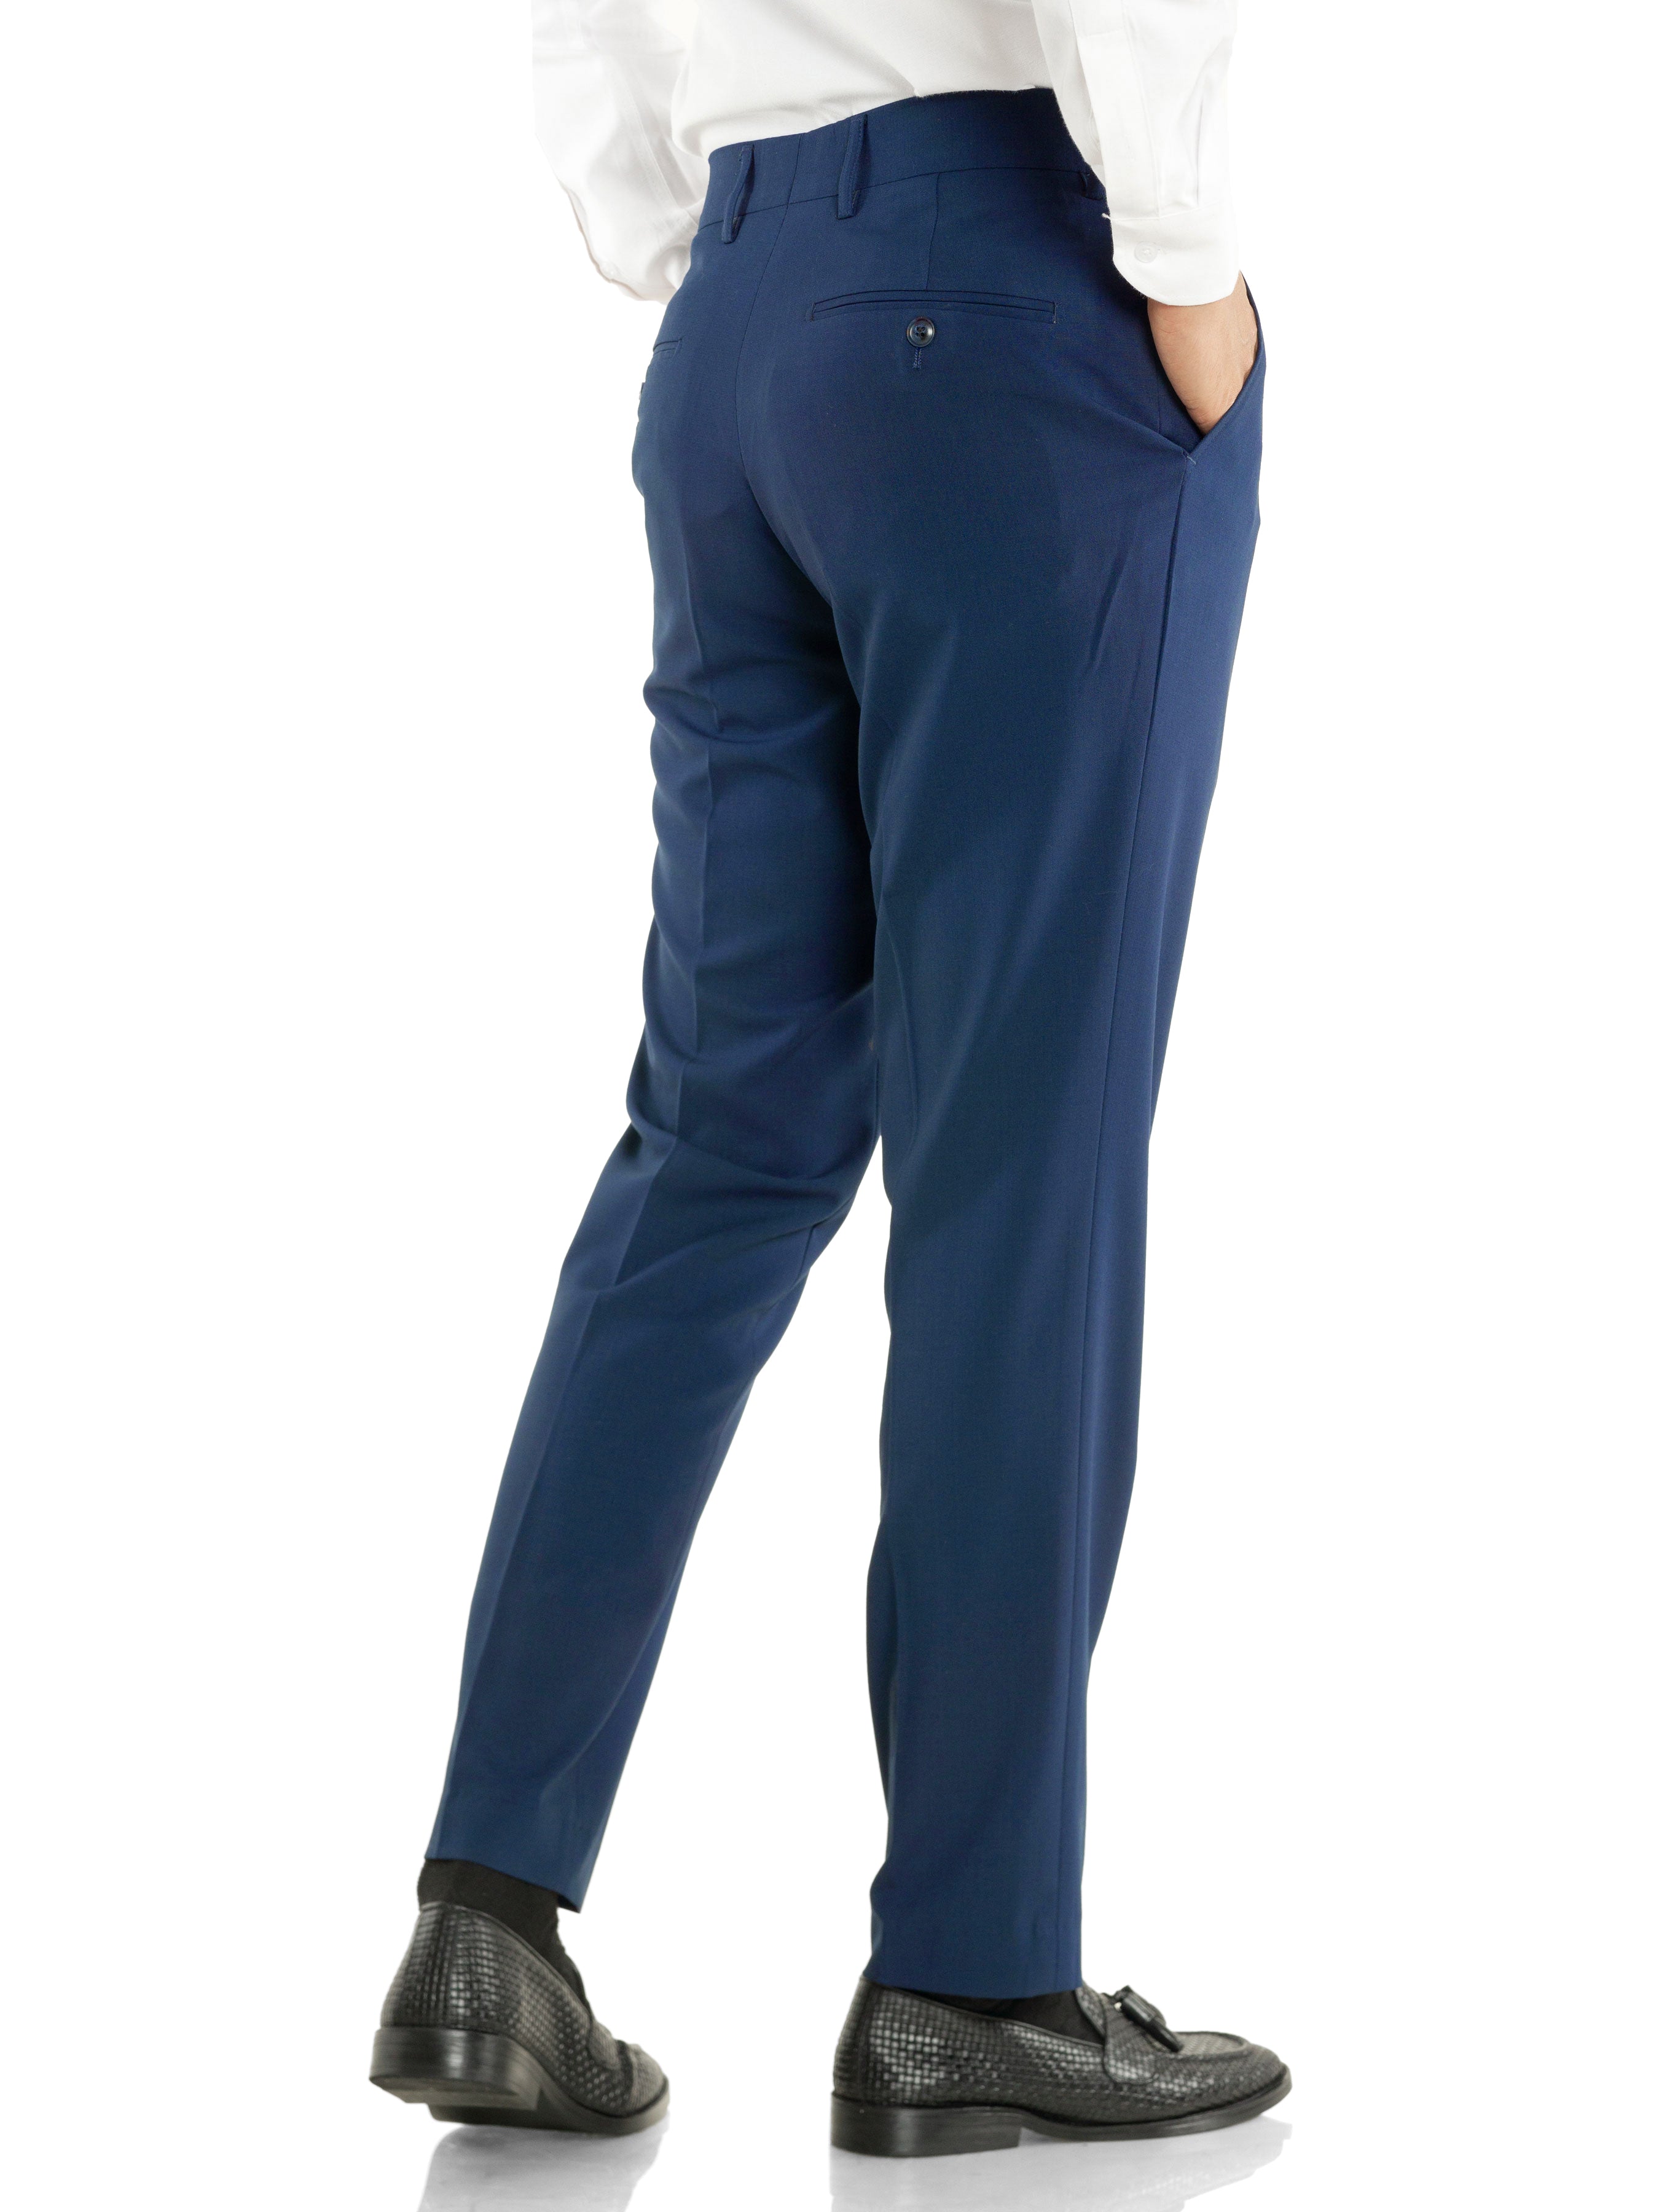 Trousers With Belt Loop - Royal Blue Plain (Stretchable)